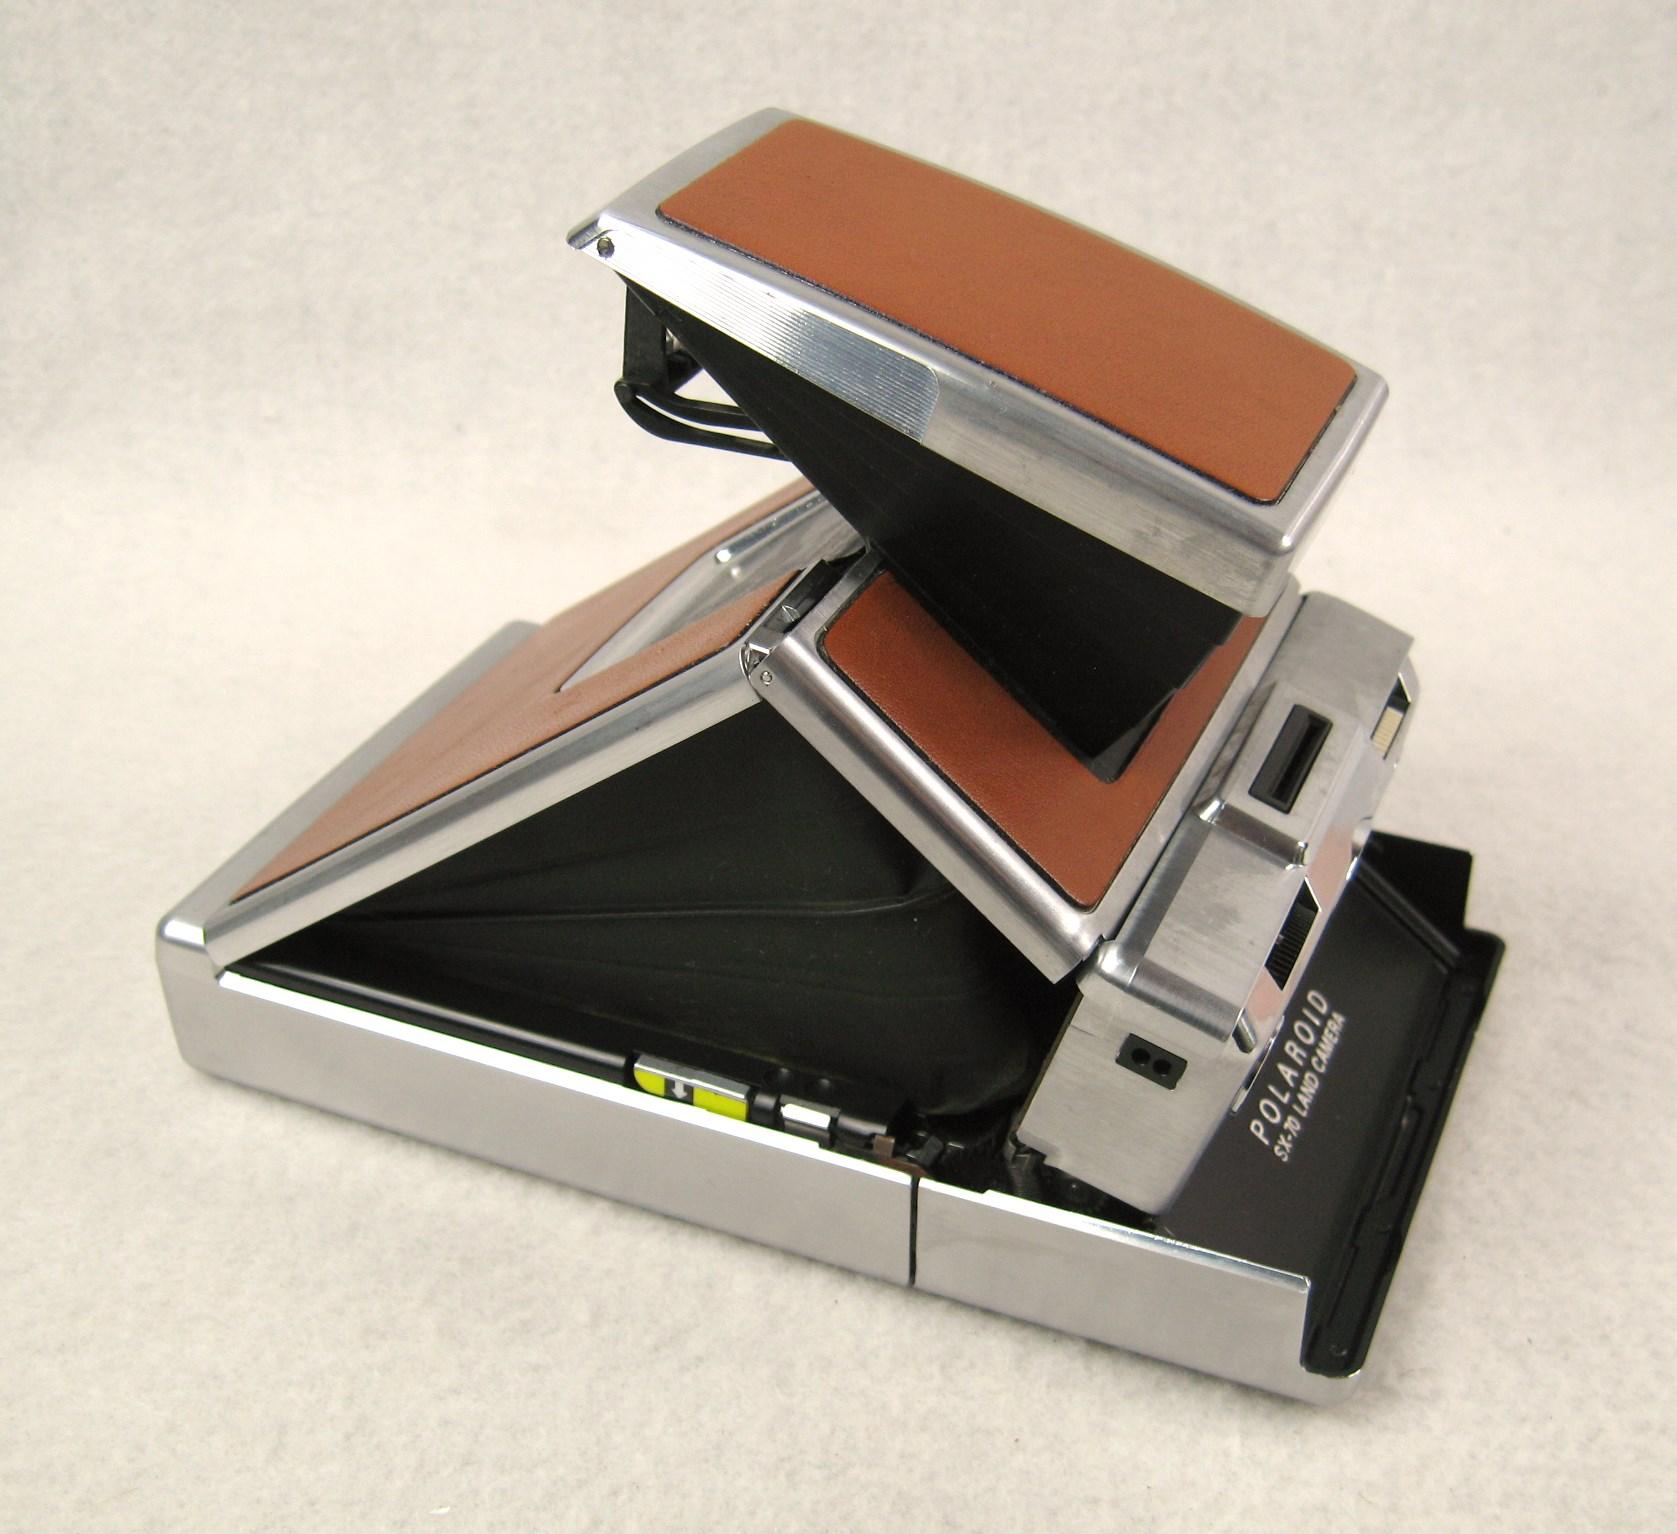 A very nice Polaroid SX - 70 camera, developed by Edwin Land and Richard Wareham, designed by Henry Dreyfuss Associates. This was state of the art and revolutionary at the time. It's brushed stainless and leather case, a single lens reflex SLR model